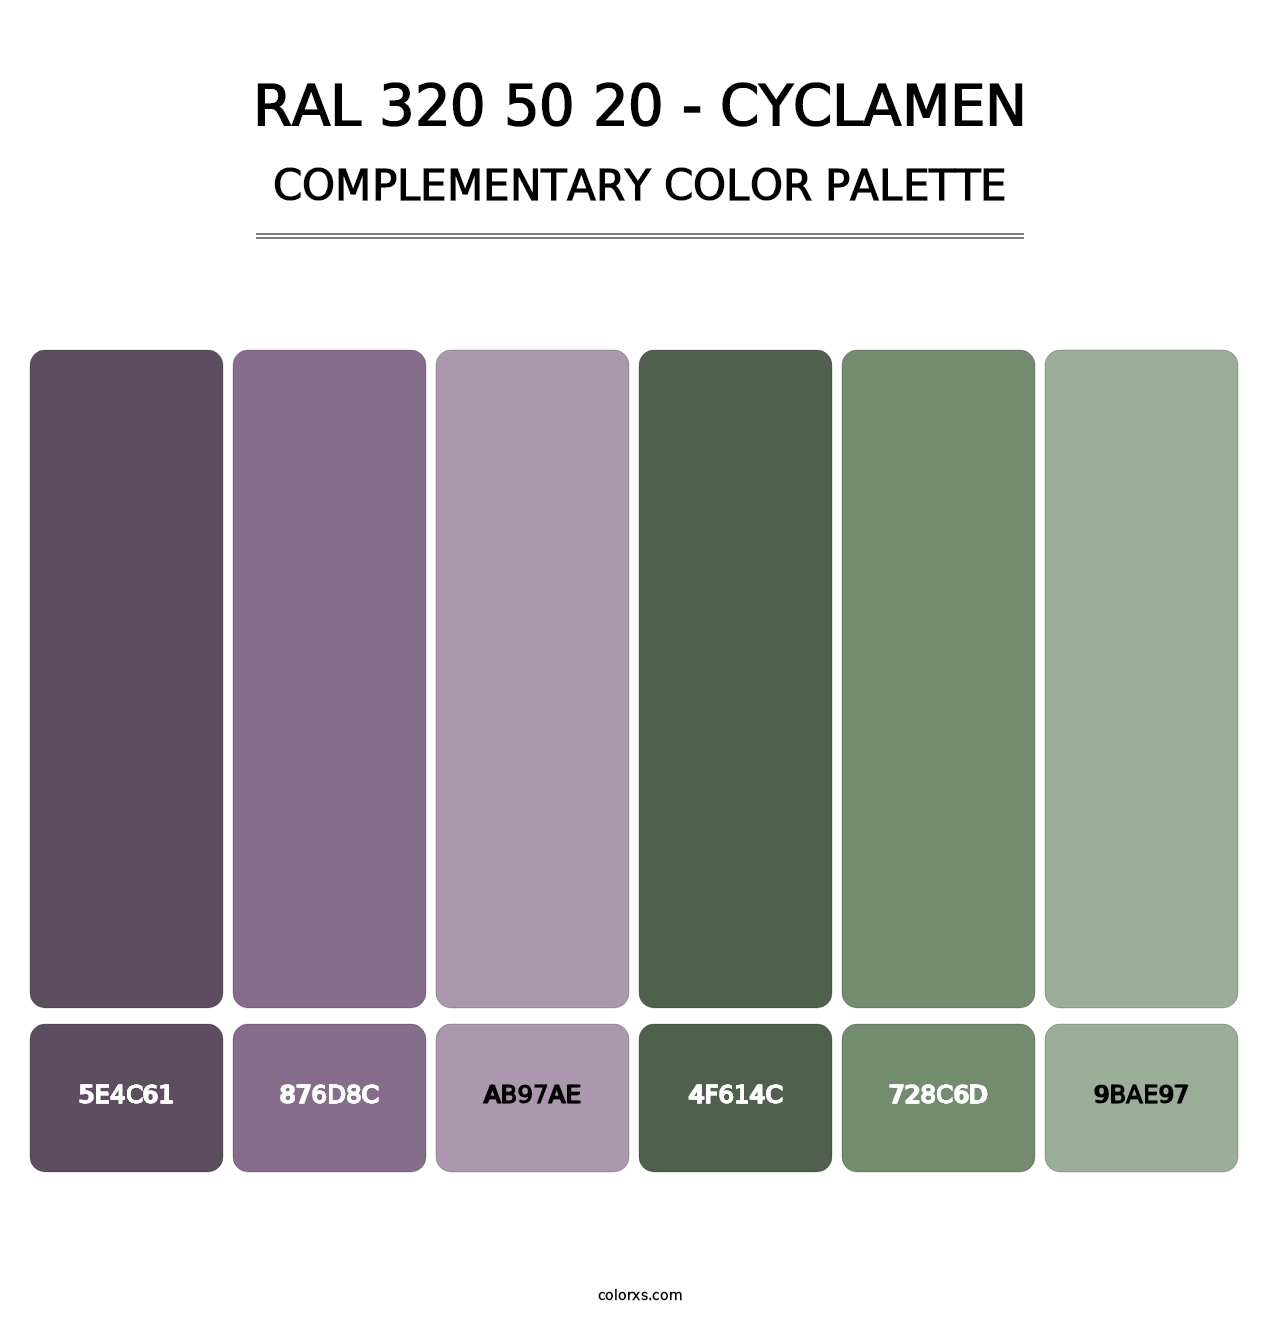 RAL 320 50 20 - Cyclamen - Complementary Color Palette